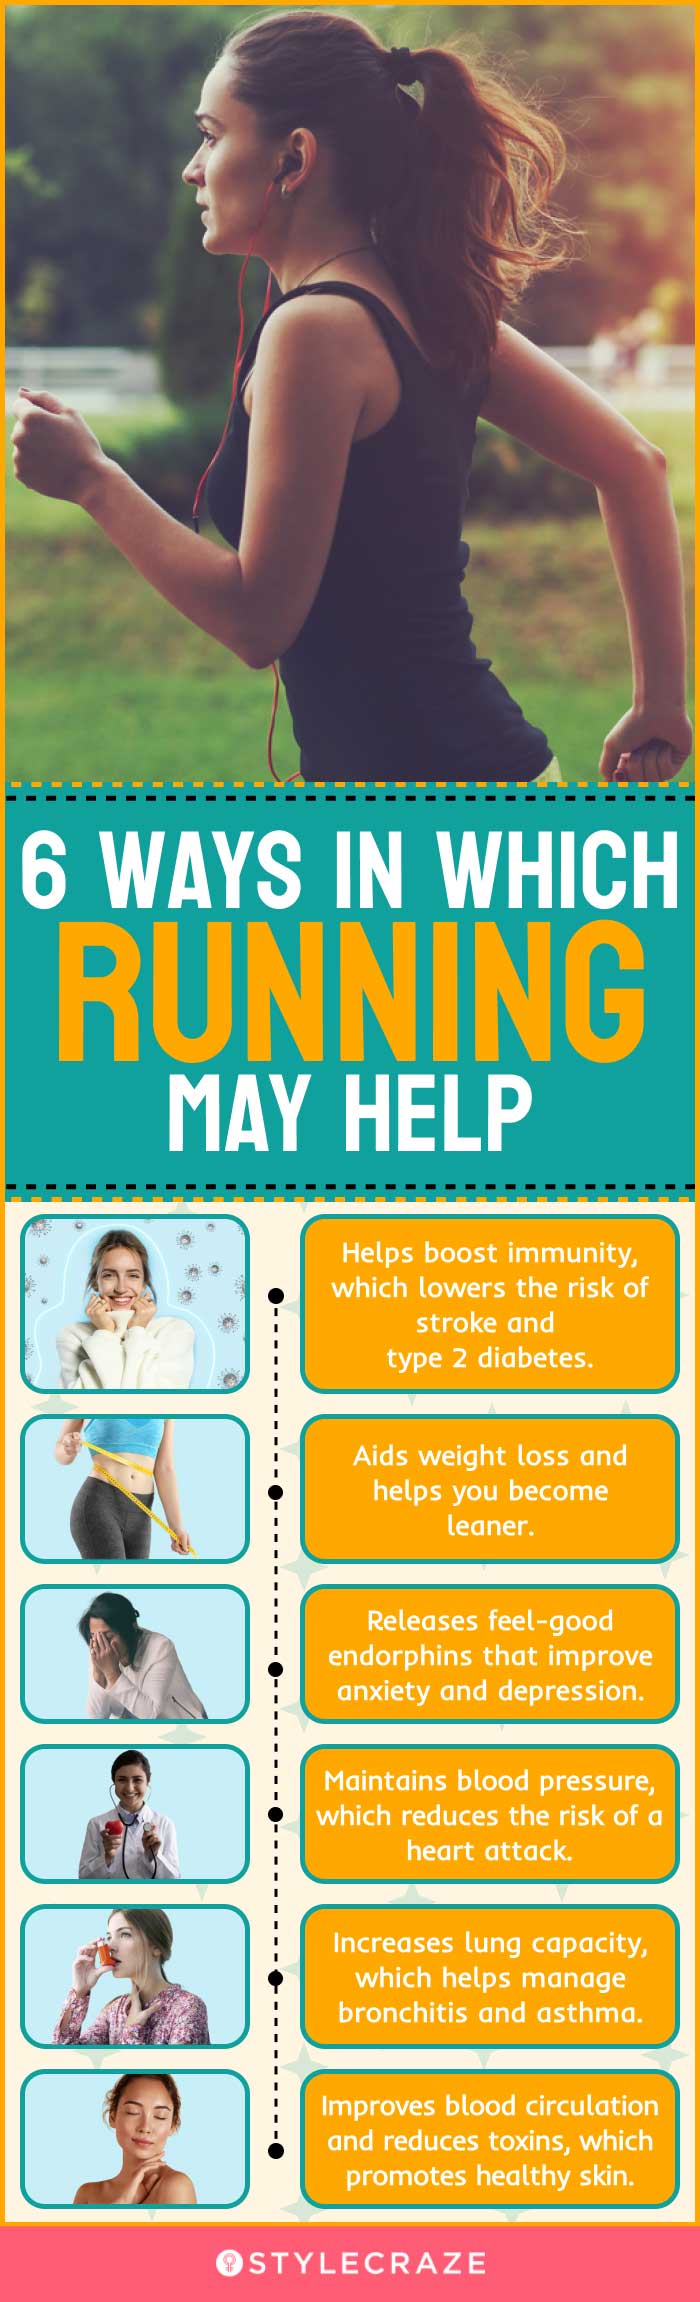 6 ways in which running may help (infographic)